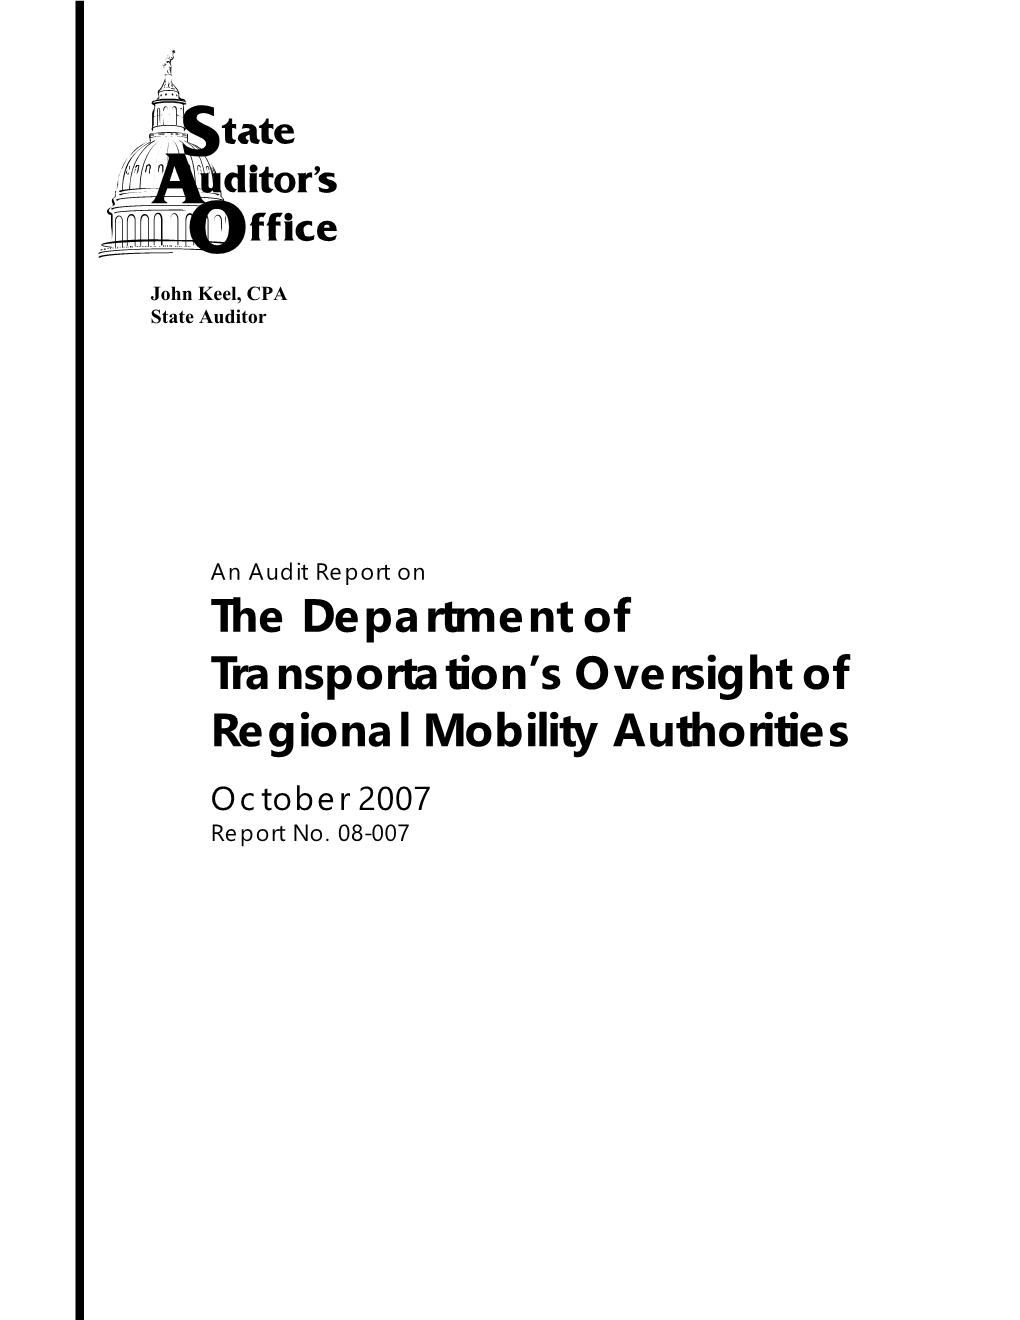 An Audit Report on the Department of Transportation's Oversight Of